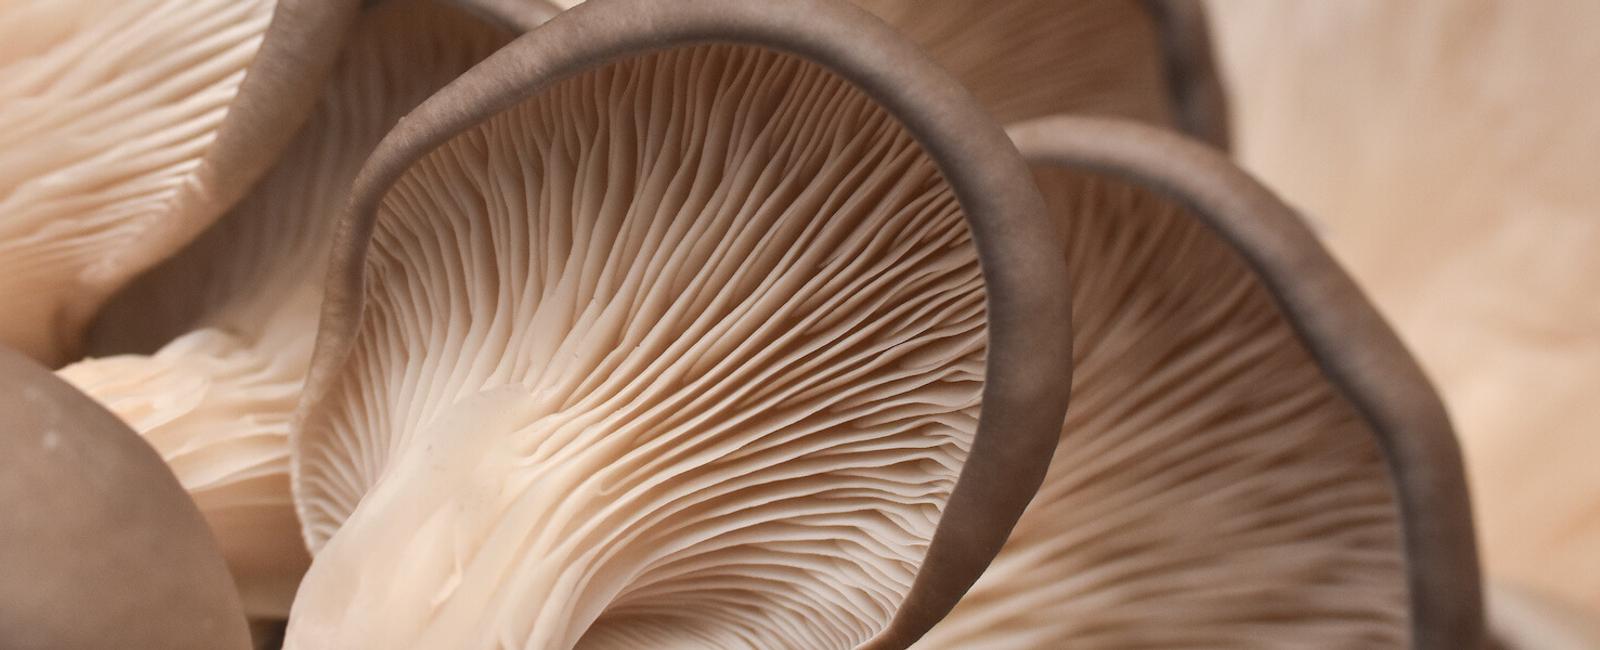 The Ultimate Guide to Pink Oyster Mushrooms